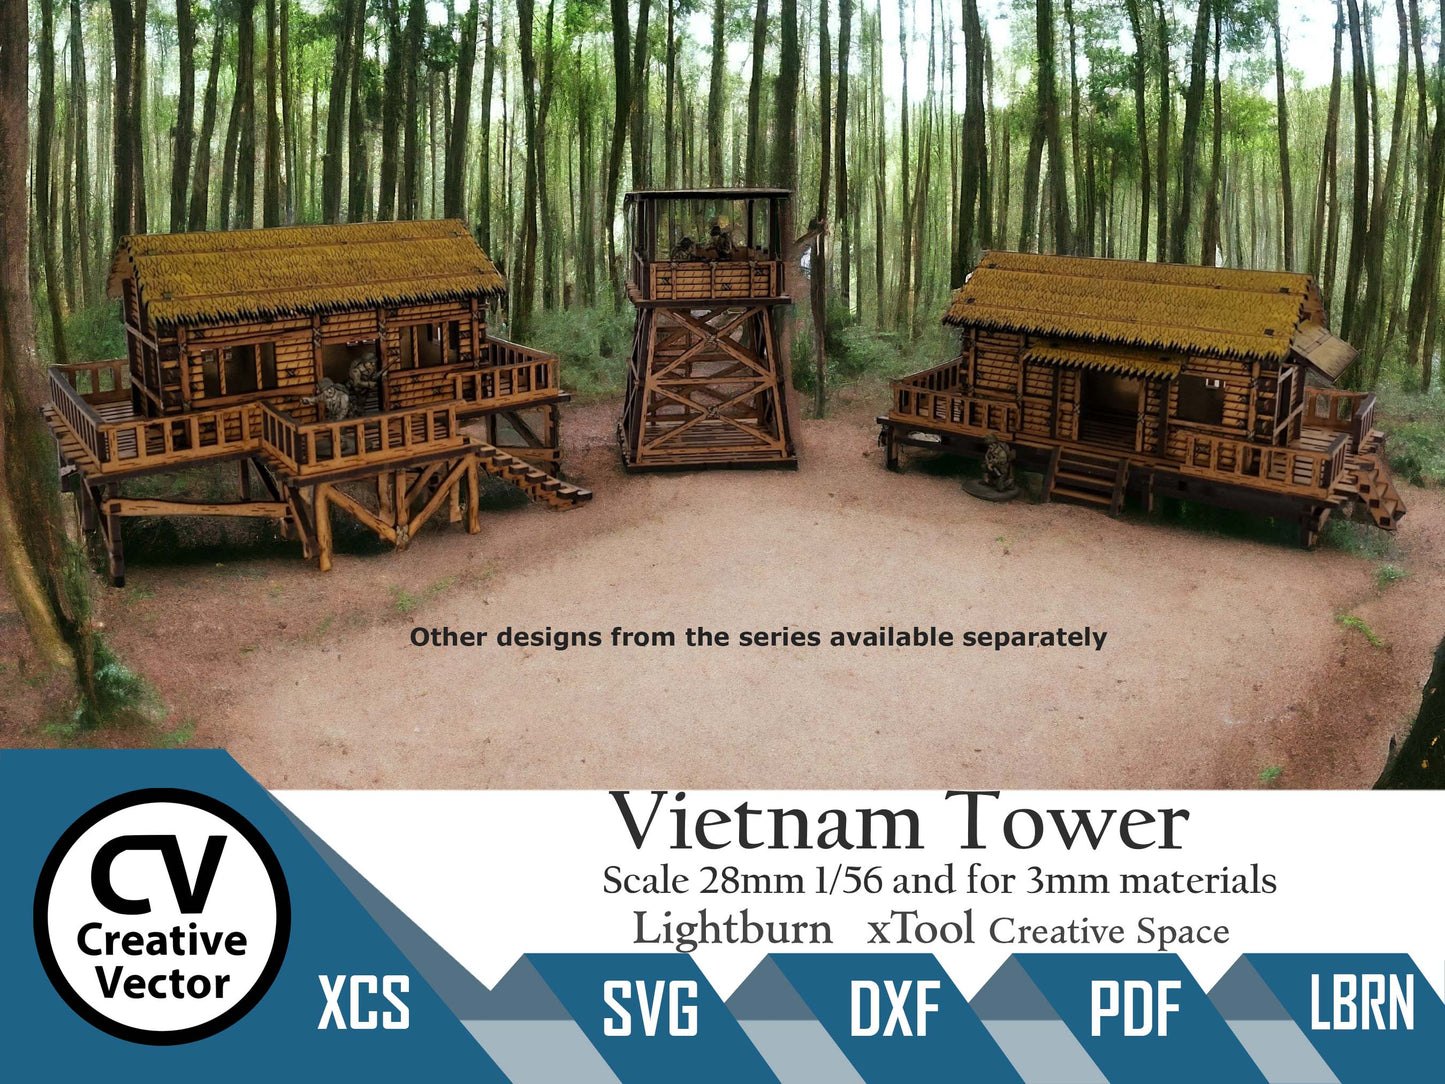 Vietnam Tower in scale 28 mm